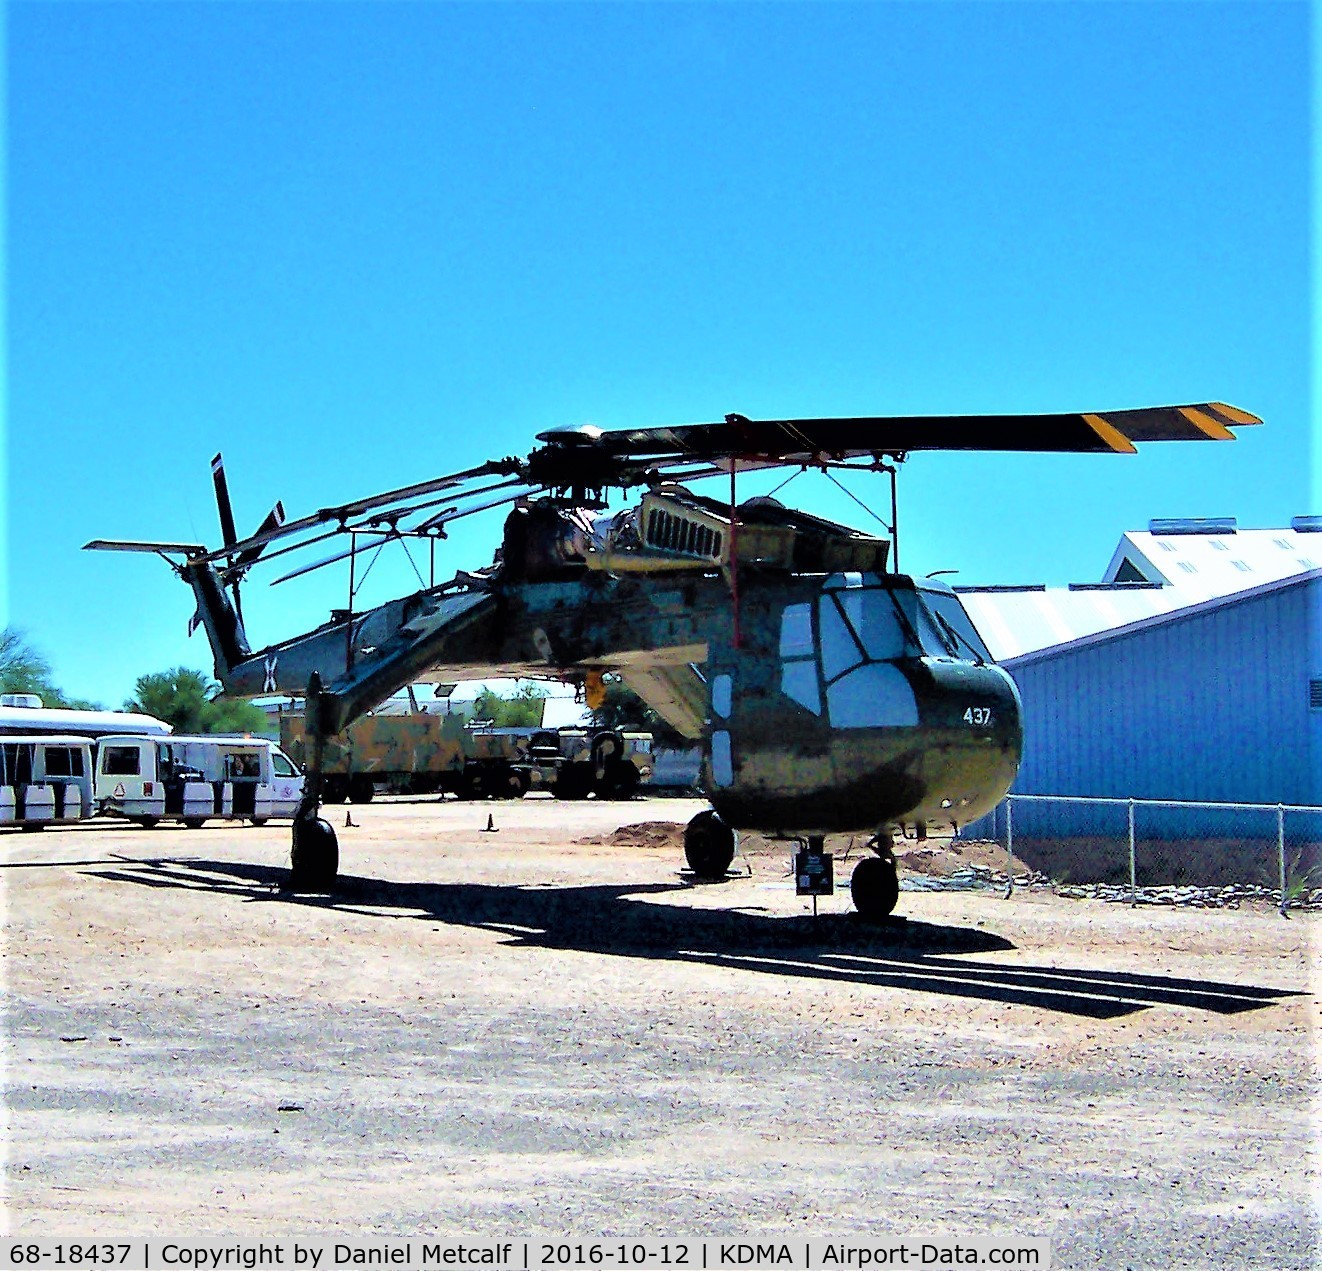 68-18437, 1968 Sikorsky CH-54A Tarhe C/N 64.039, Seen at the Pima Air & Space Museum